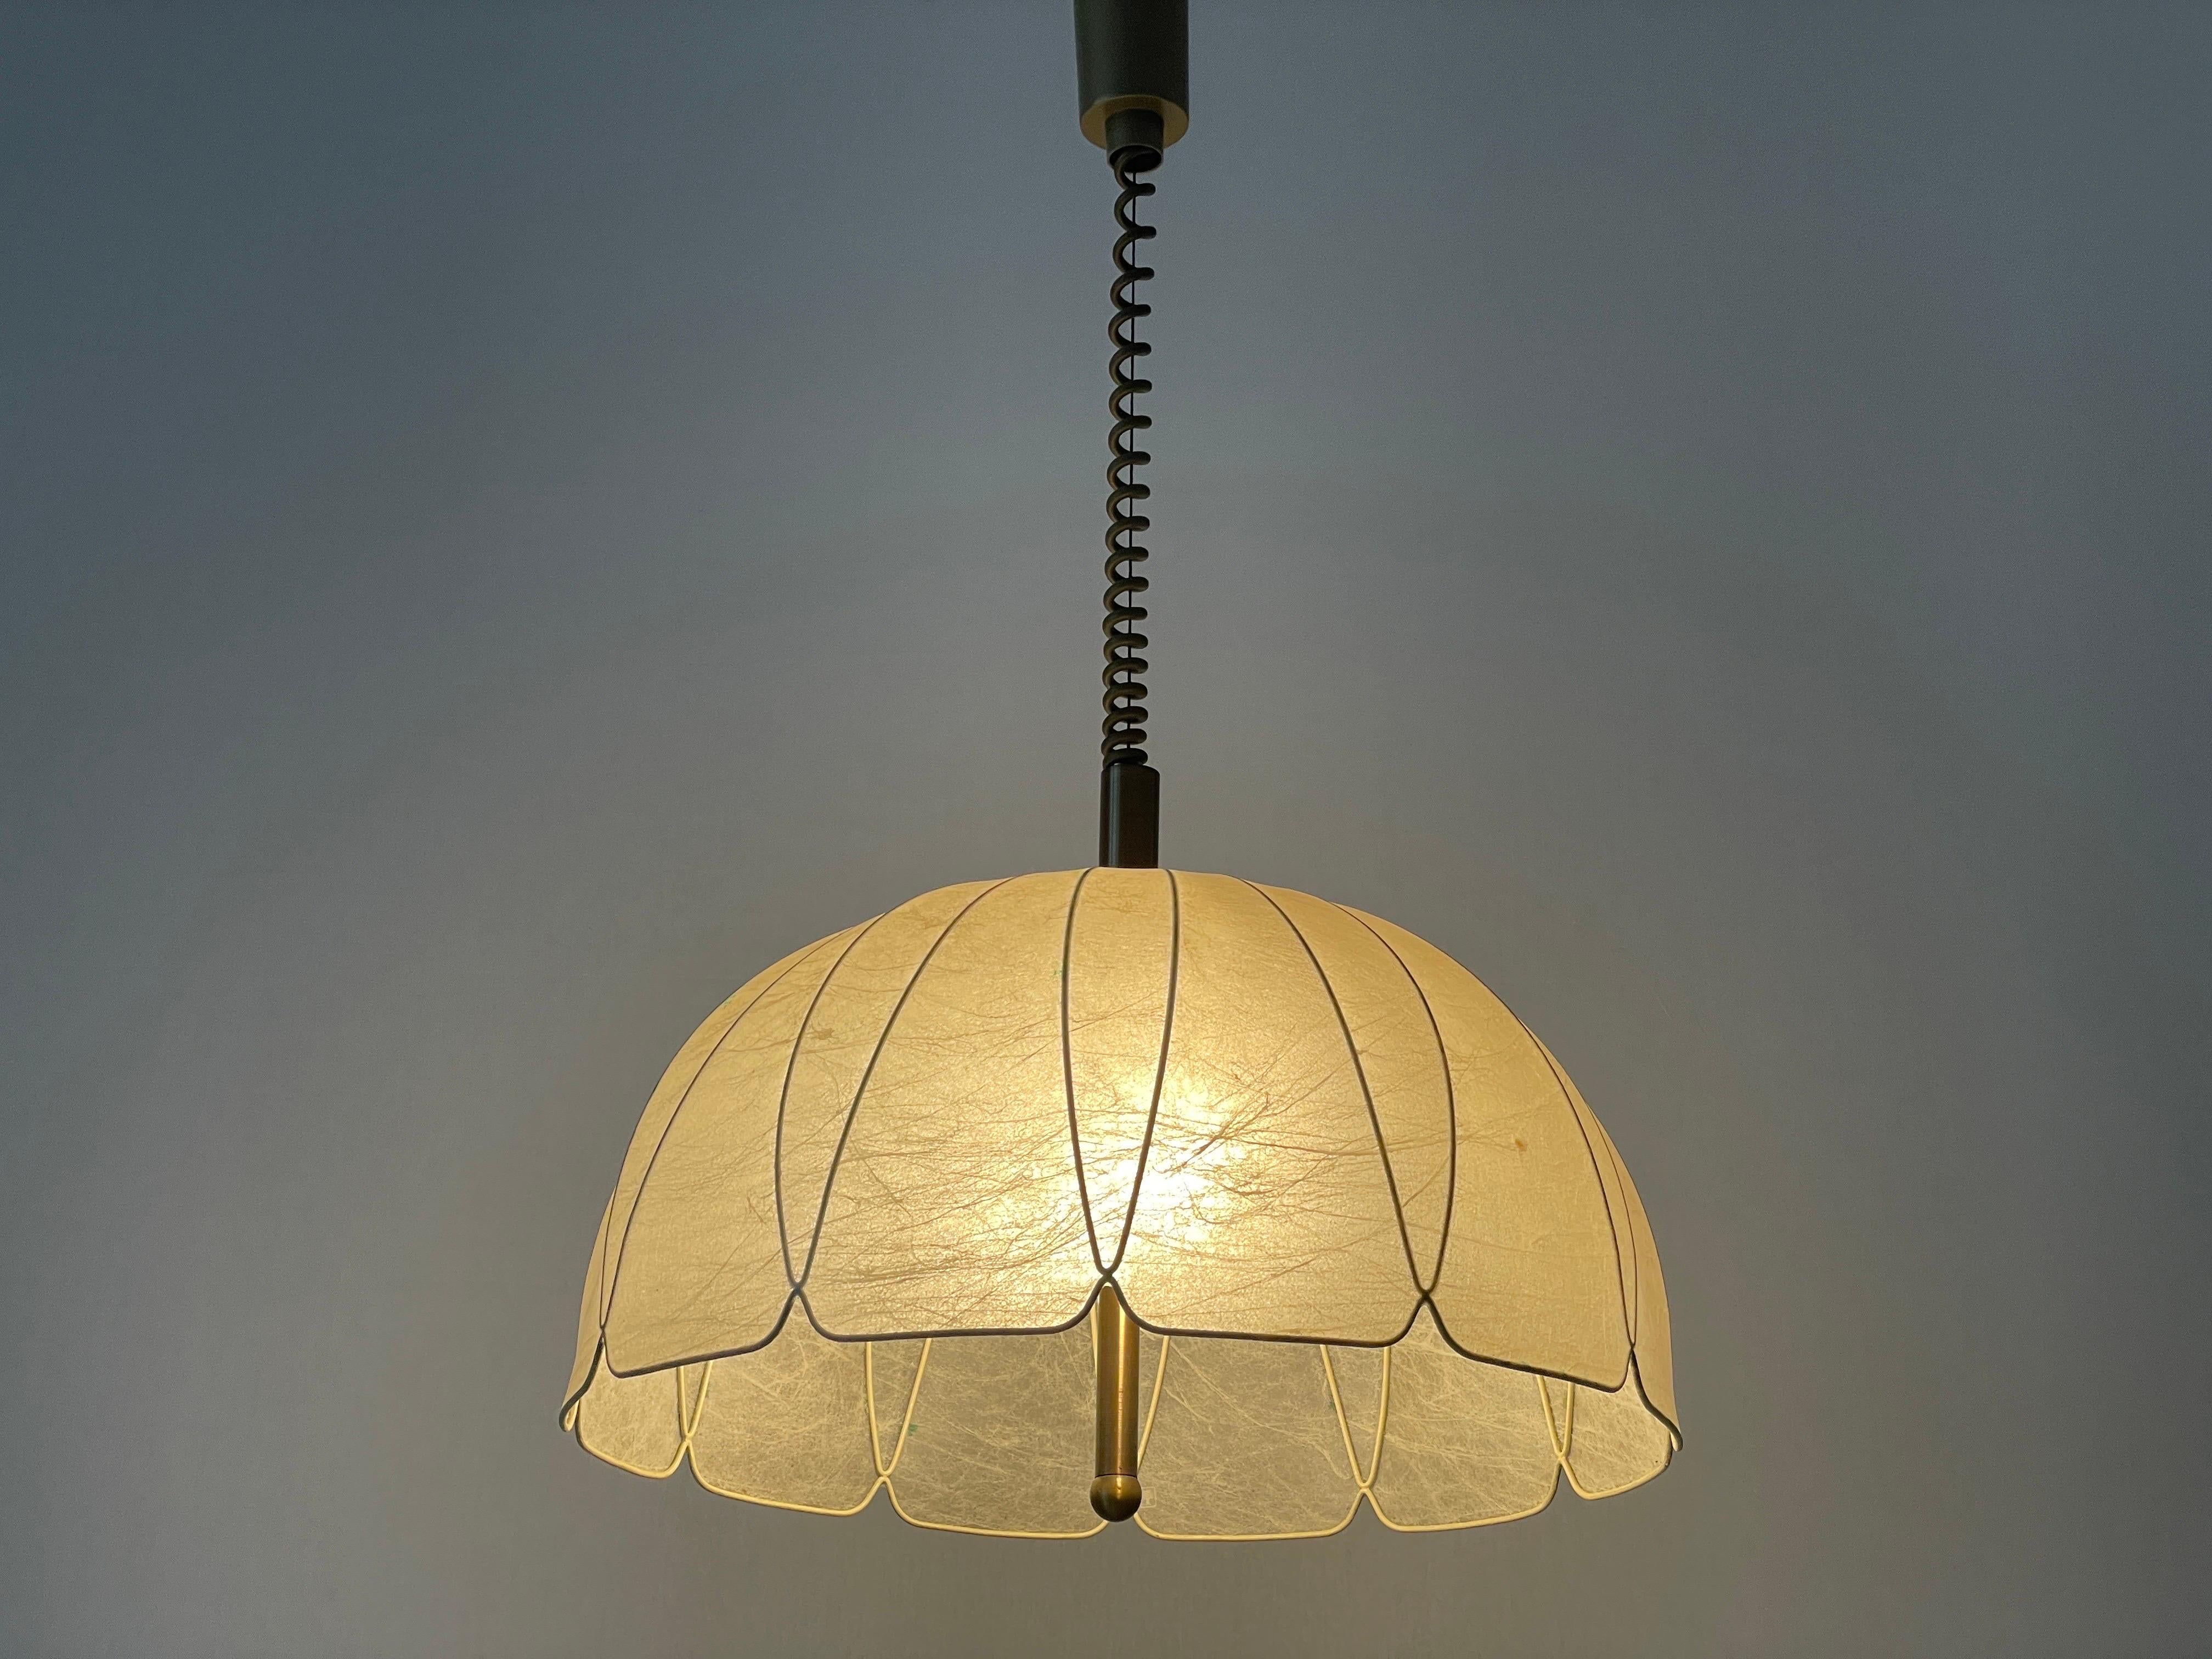 Flower Design Cocoon Adjustable Height Pendant Lamp by Goldkant, 1960s, Germany For Sale 5